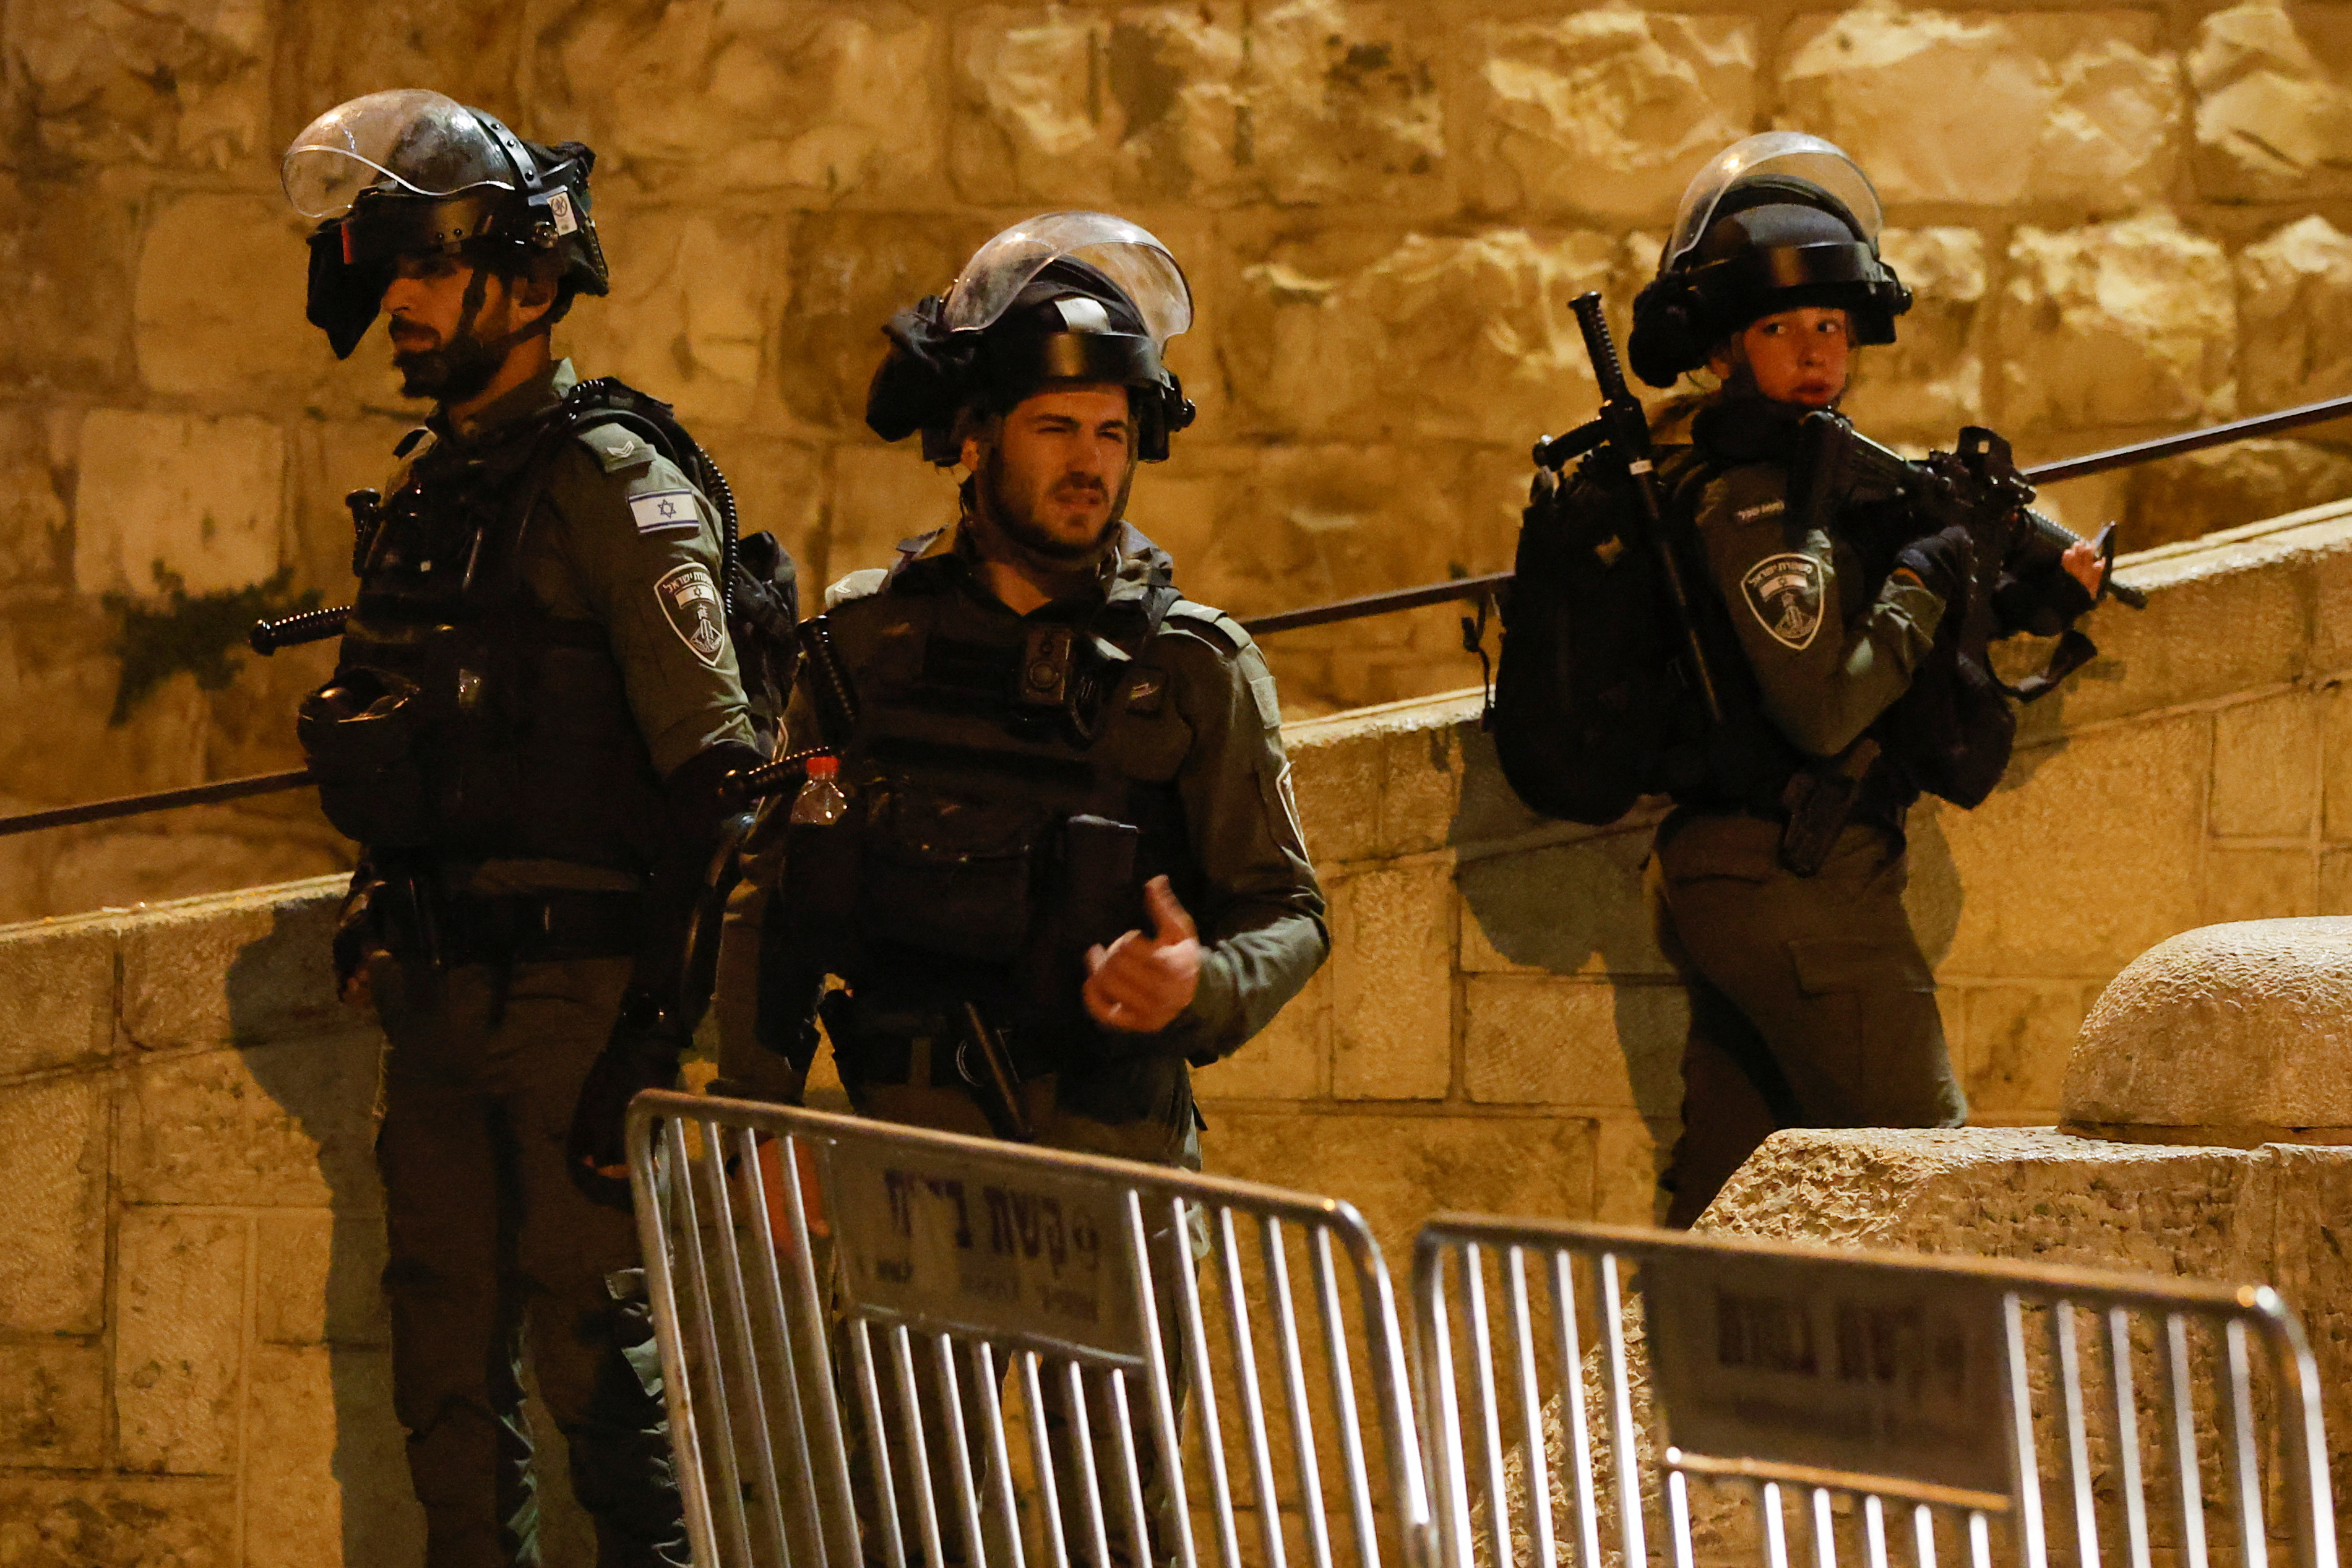 Tension arises during clashes with Palestinians in Jerusalem's Old City